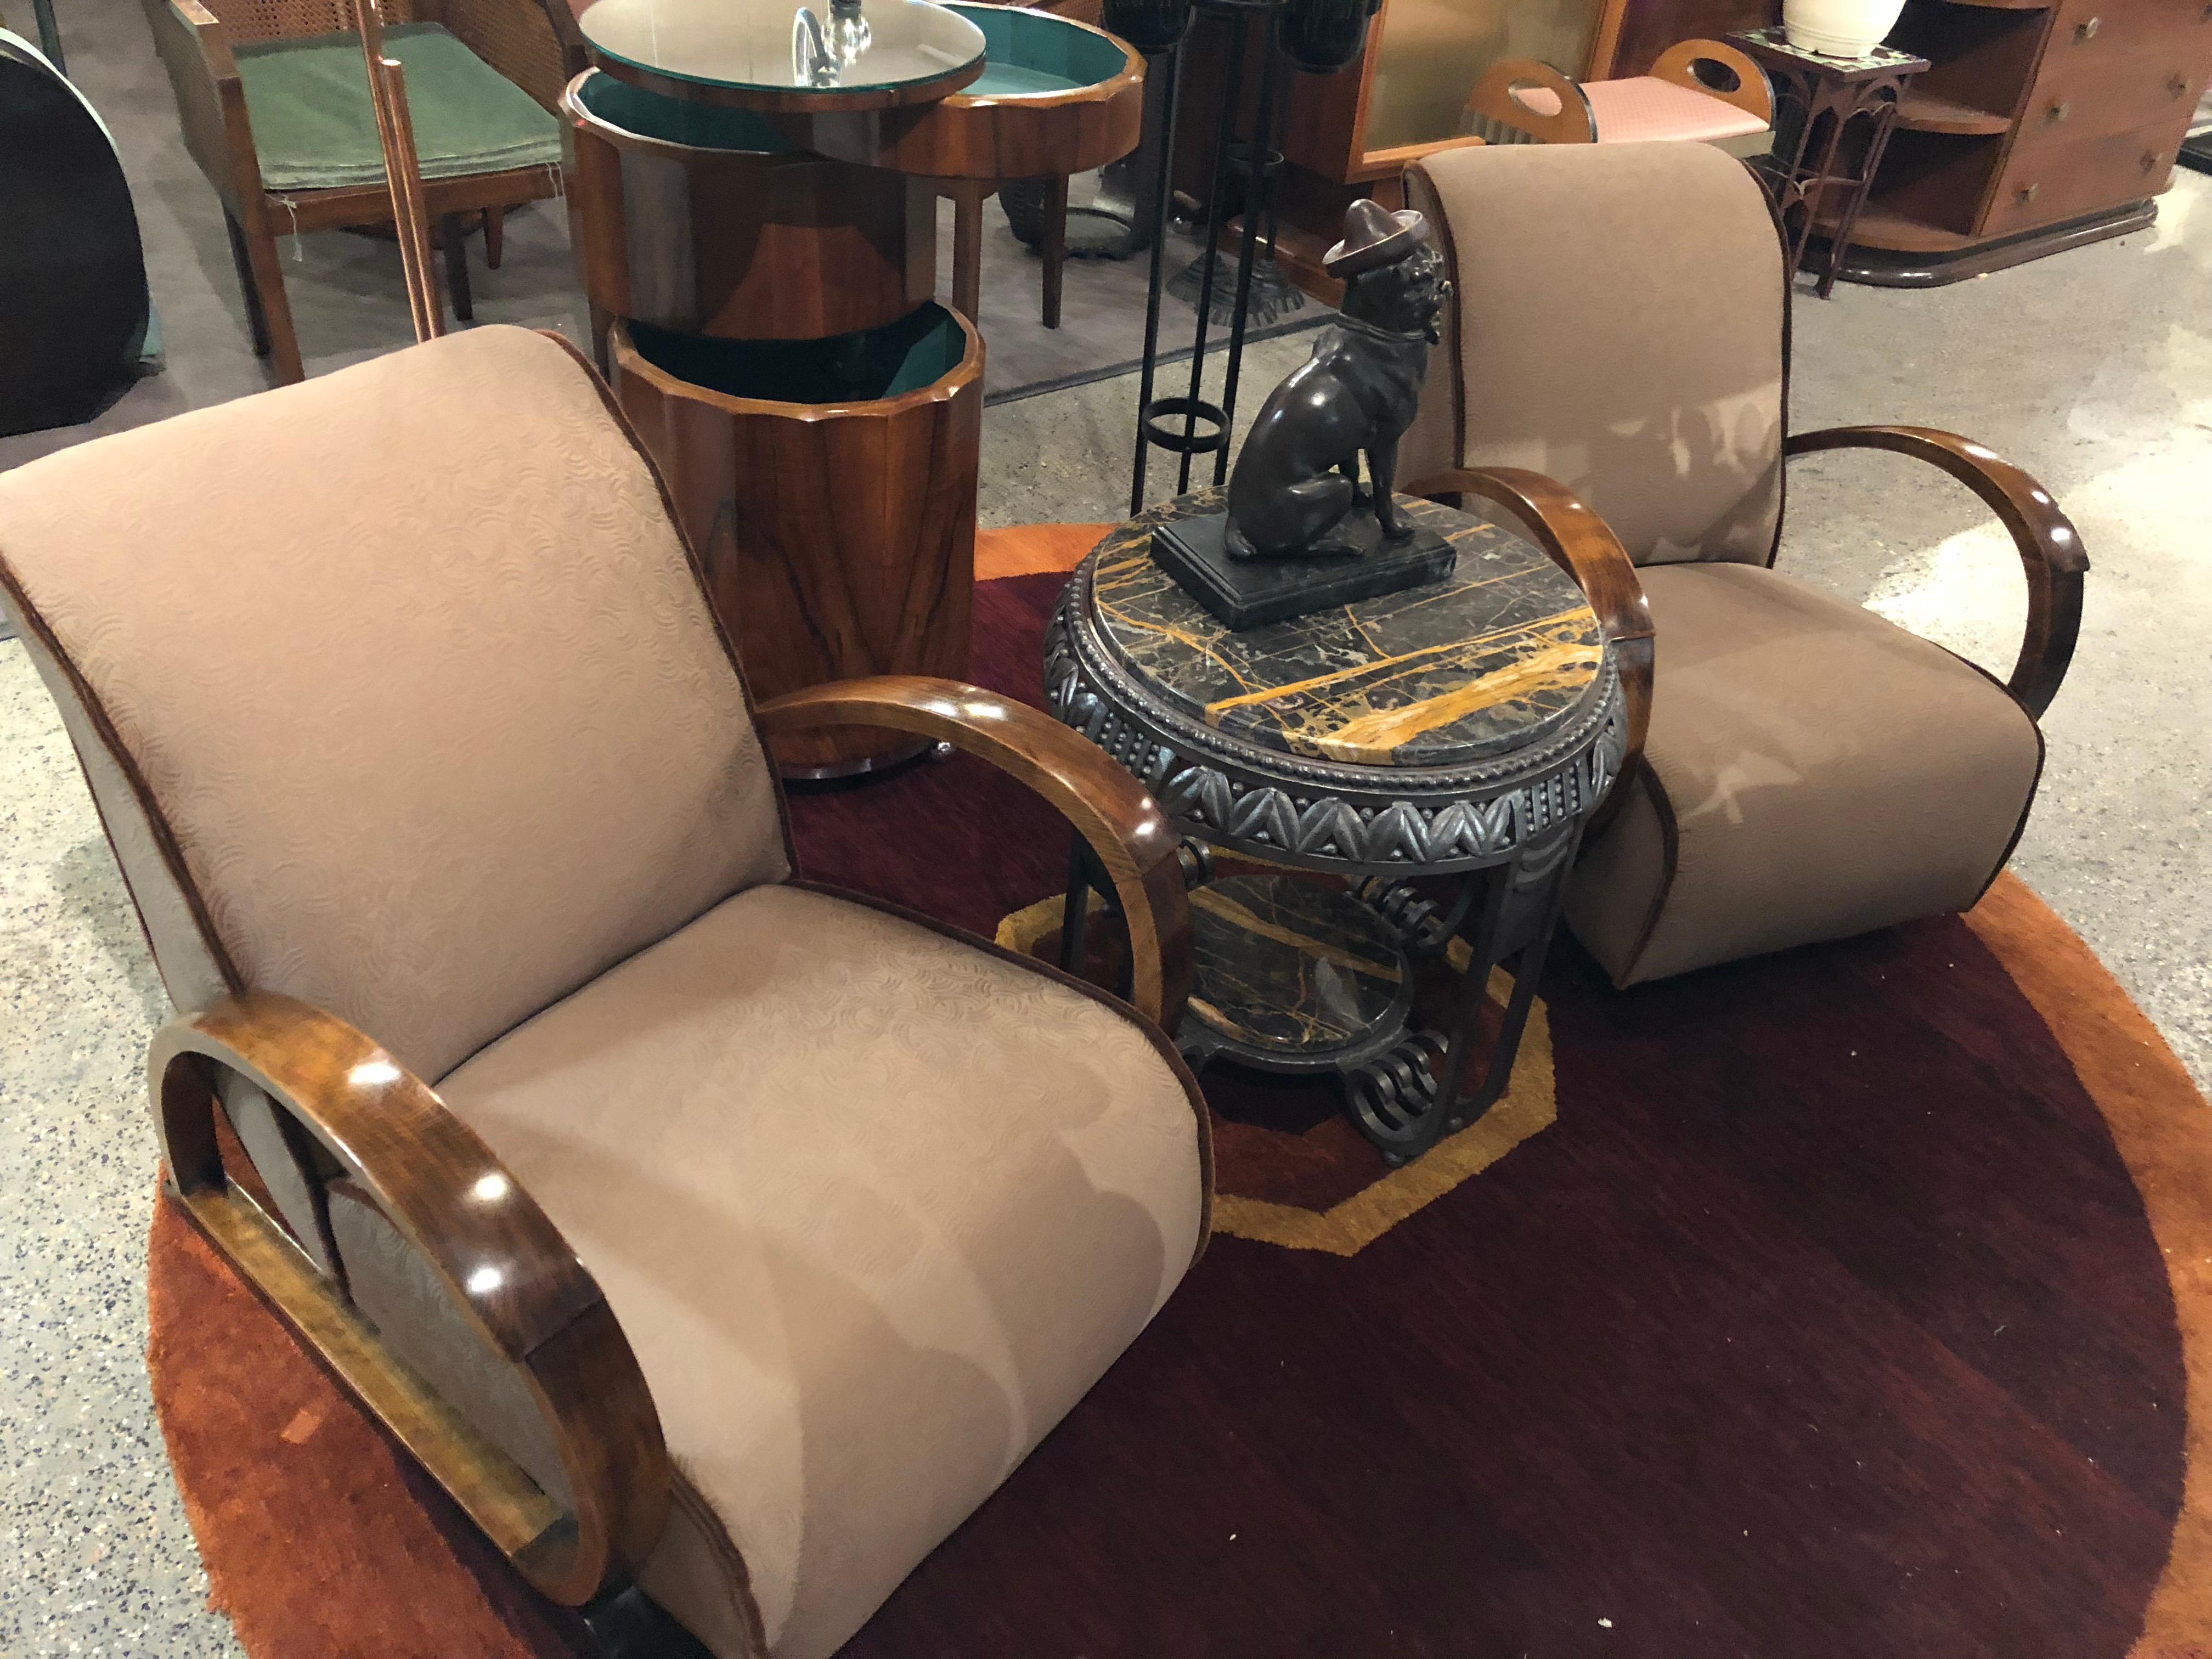 Bentwood split front Art Deco reclining chairs. Newly restored in a creamy beige embossed style art deco fabric with oversized brown mohair piping. Very comfortable laid back seating with circular streamline style solid wood arms. Would look just